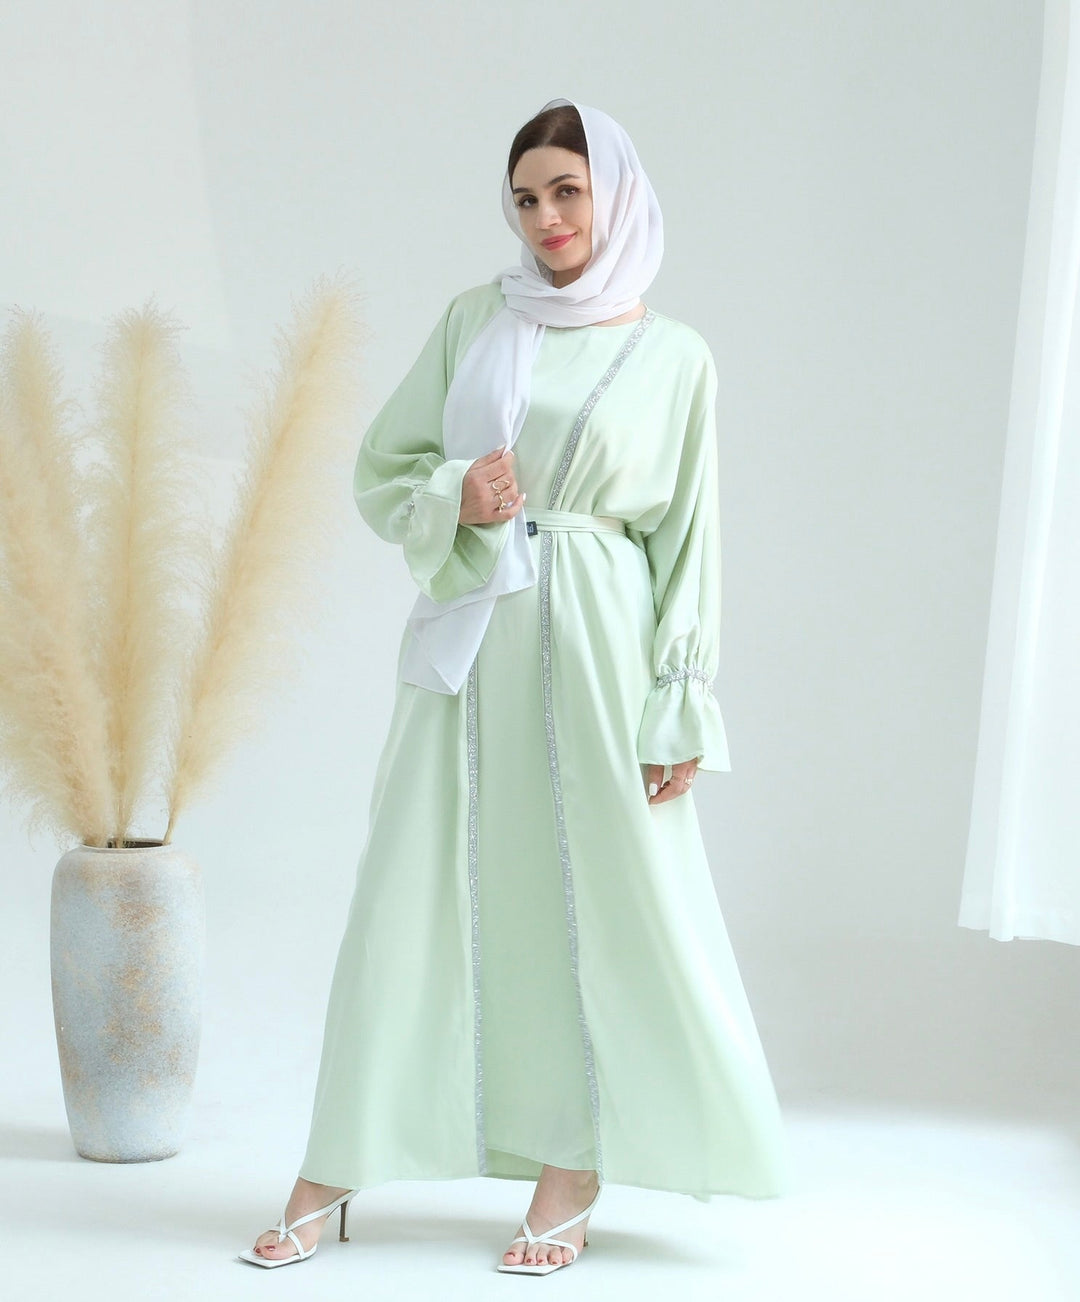 Get trendy with Aria2 Matching 3-piece Set - Mint - Dresses available at Voilee NY. Grab yours for $110 today!